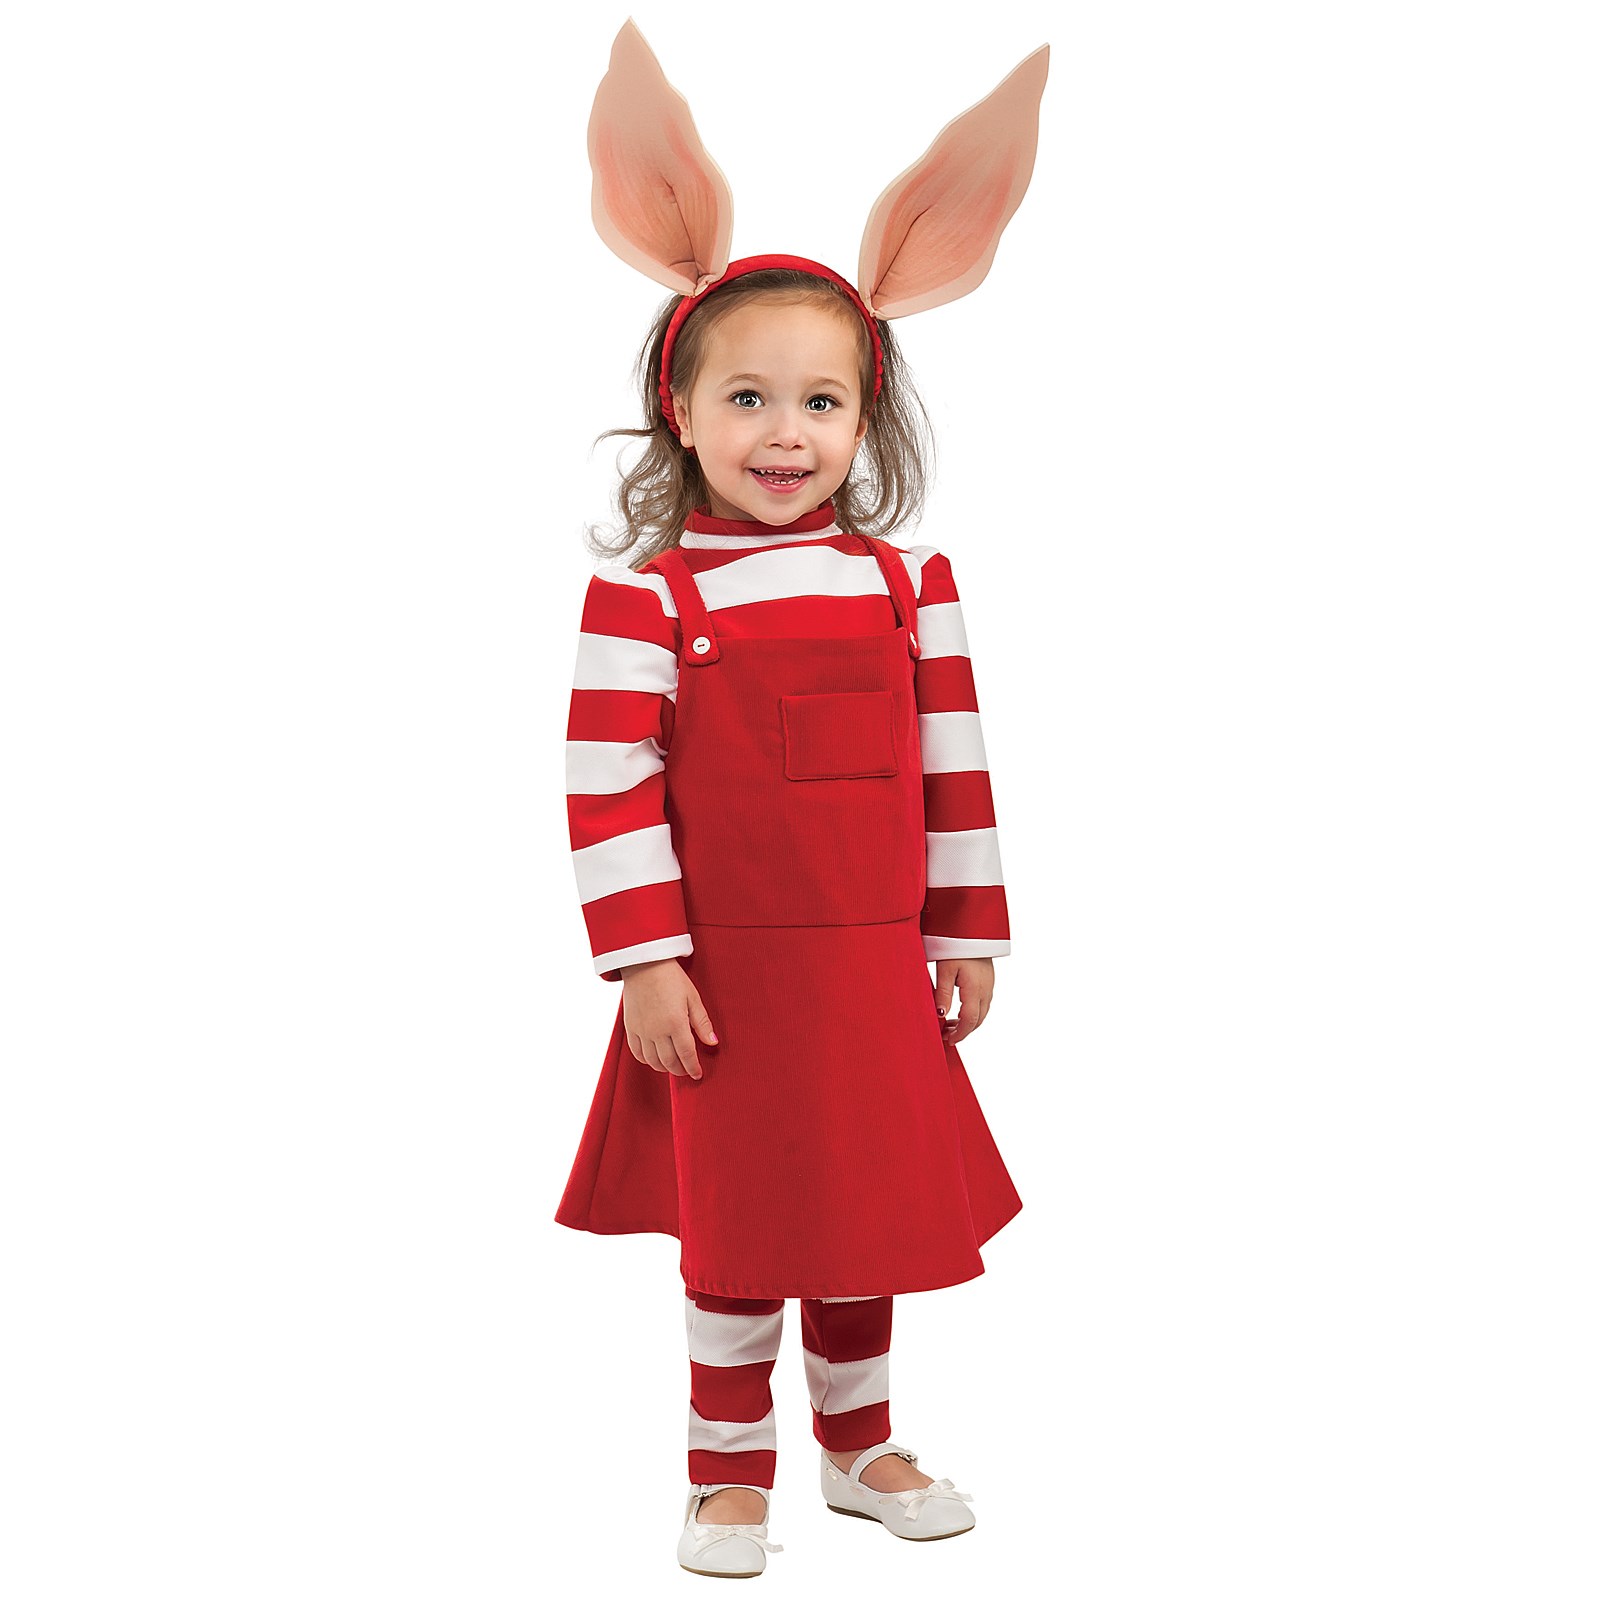 Olivia Deluxe Toddler / Child Costume